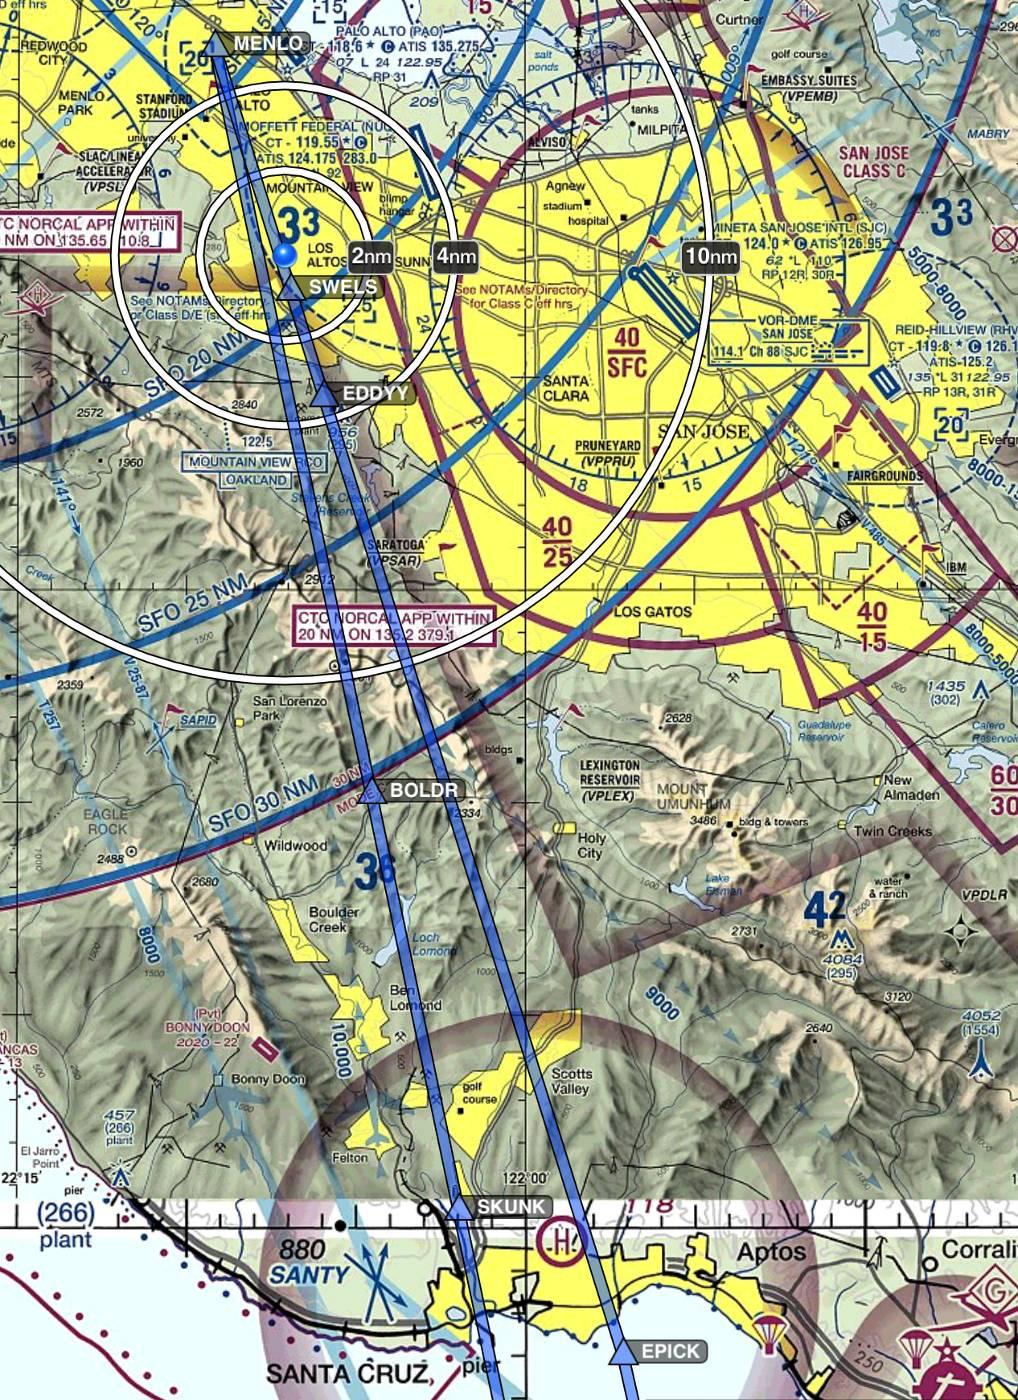 Bird s s Eye View of Class B Airspace Intersecting BIGSUR and SERFR This is a top view of the Class B concentric rings. The rings are 5 miles wide. The outer ring has a floor of 8,000 ft.